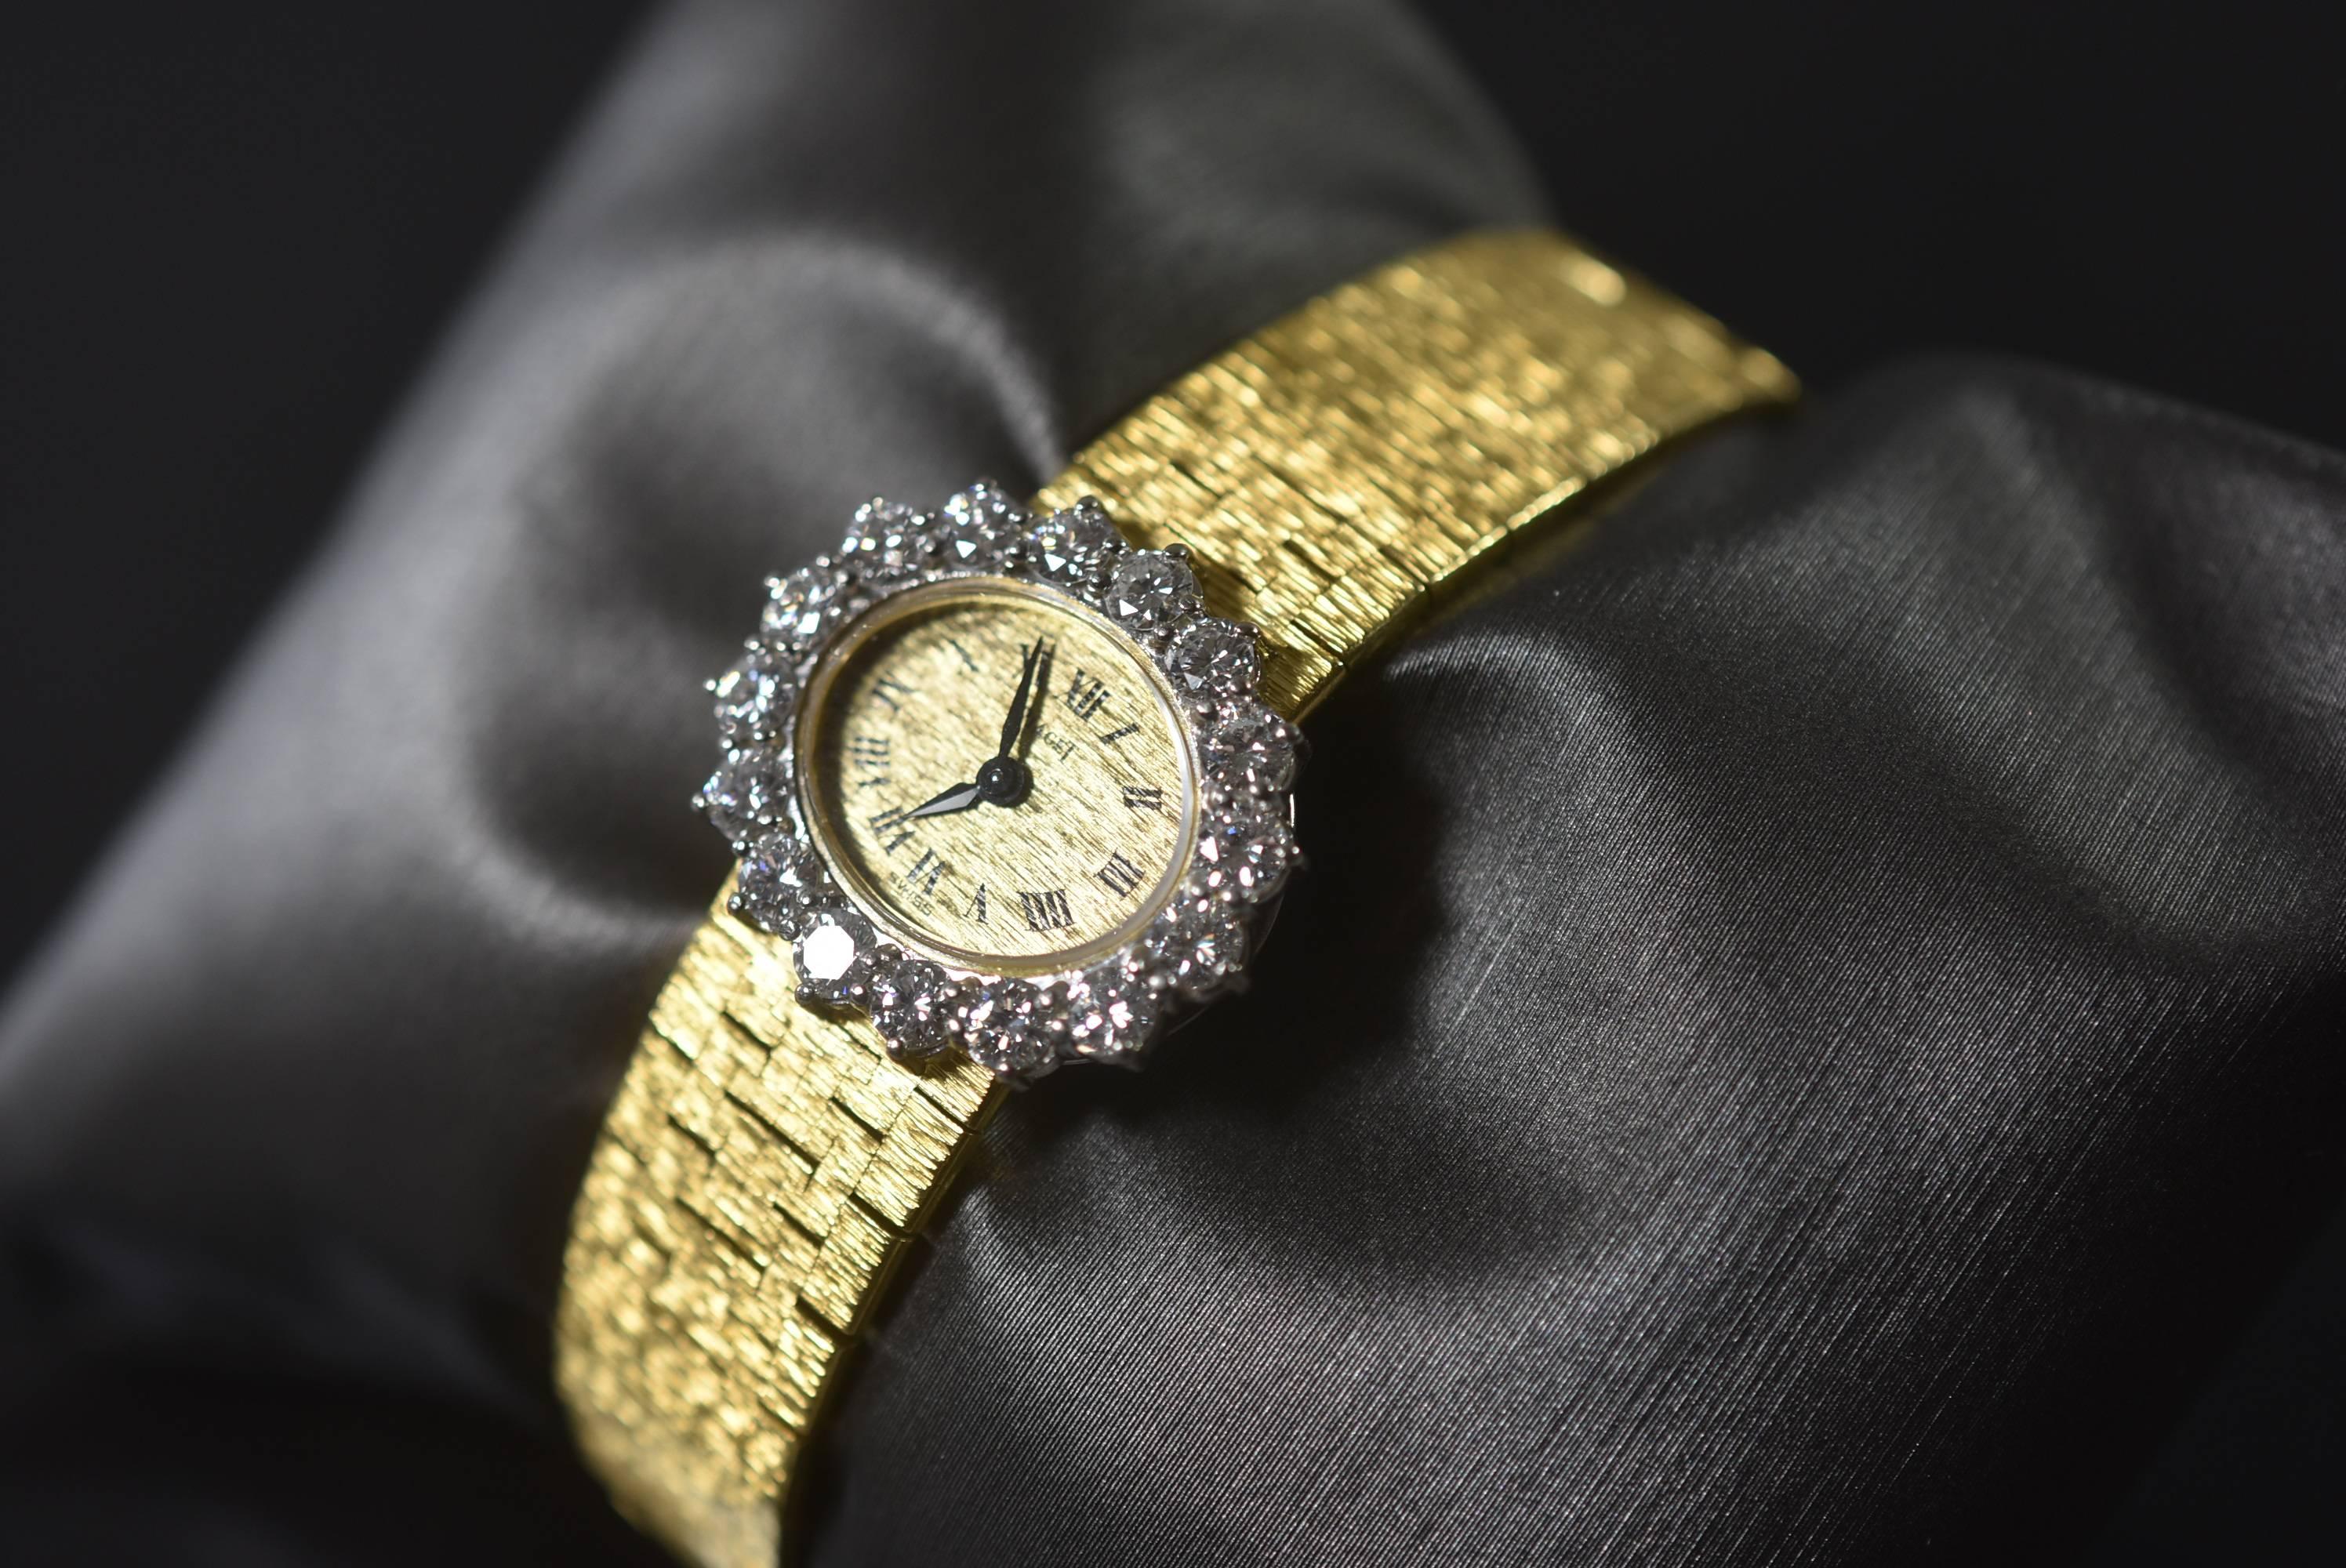 A stunning 18-karat Piaget diamond wristwatch. There are 2 carat of diamonds, VVS - F color. It has been serviced. Very light wear. It has a small band that is 6 1/16